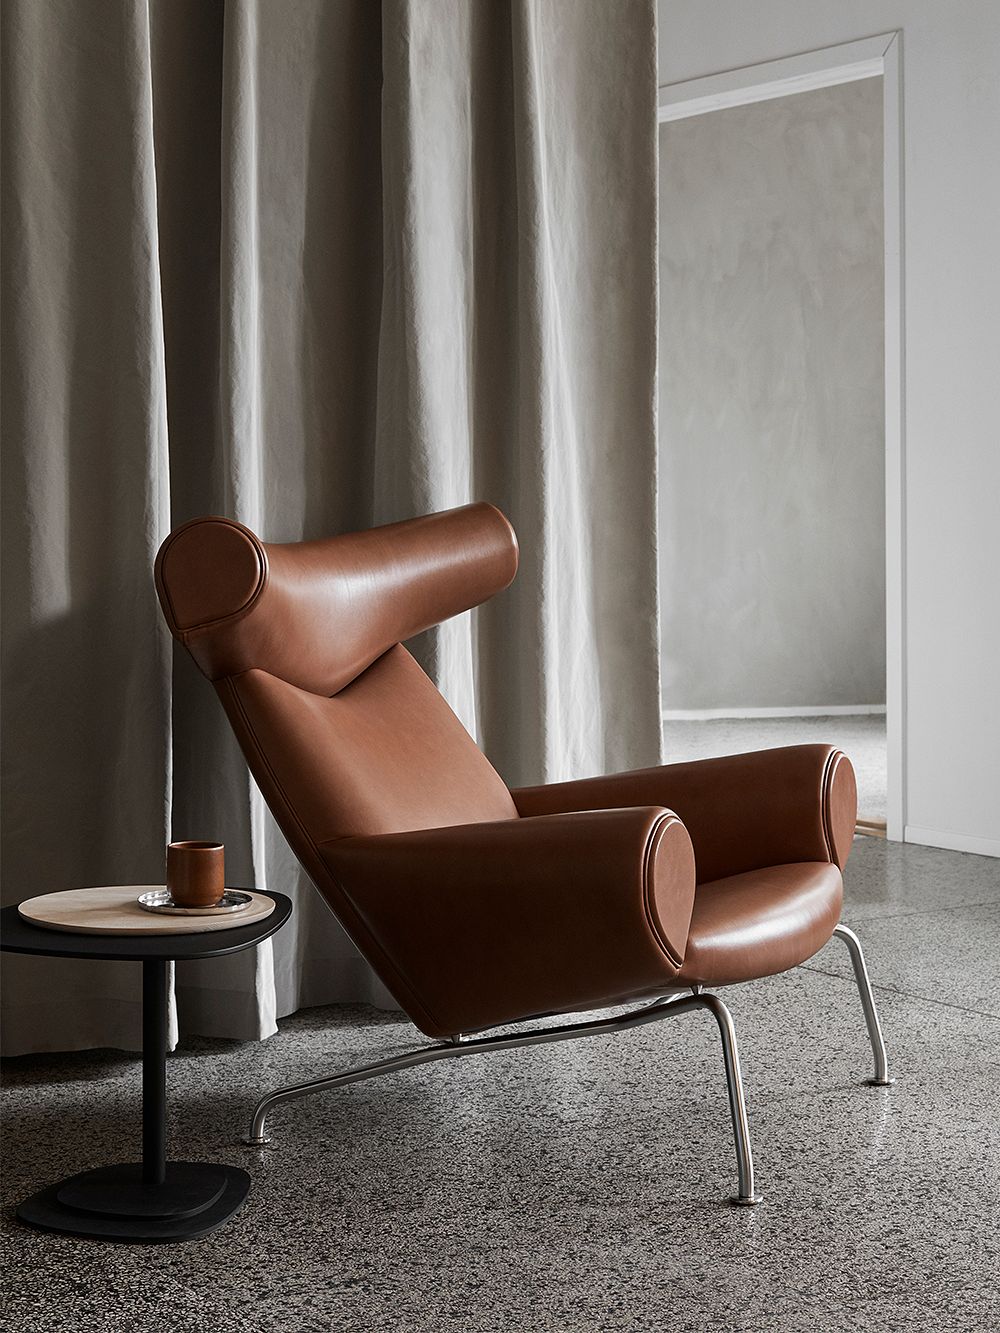 Fredericia Wegner Ox chair, brushed chrome - cognac leather